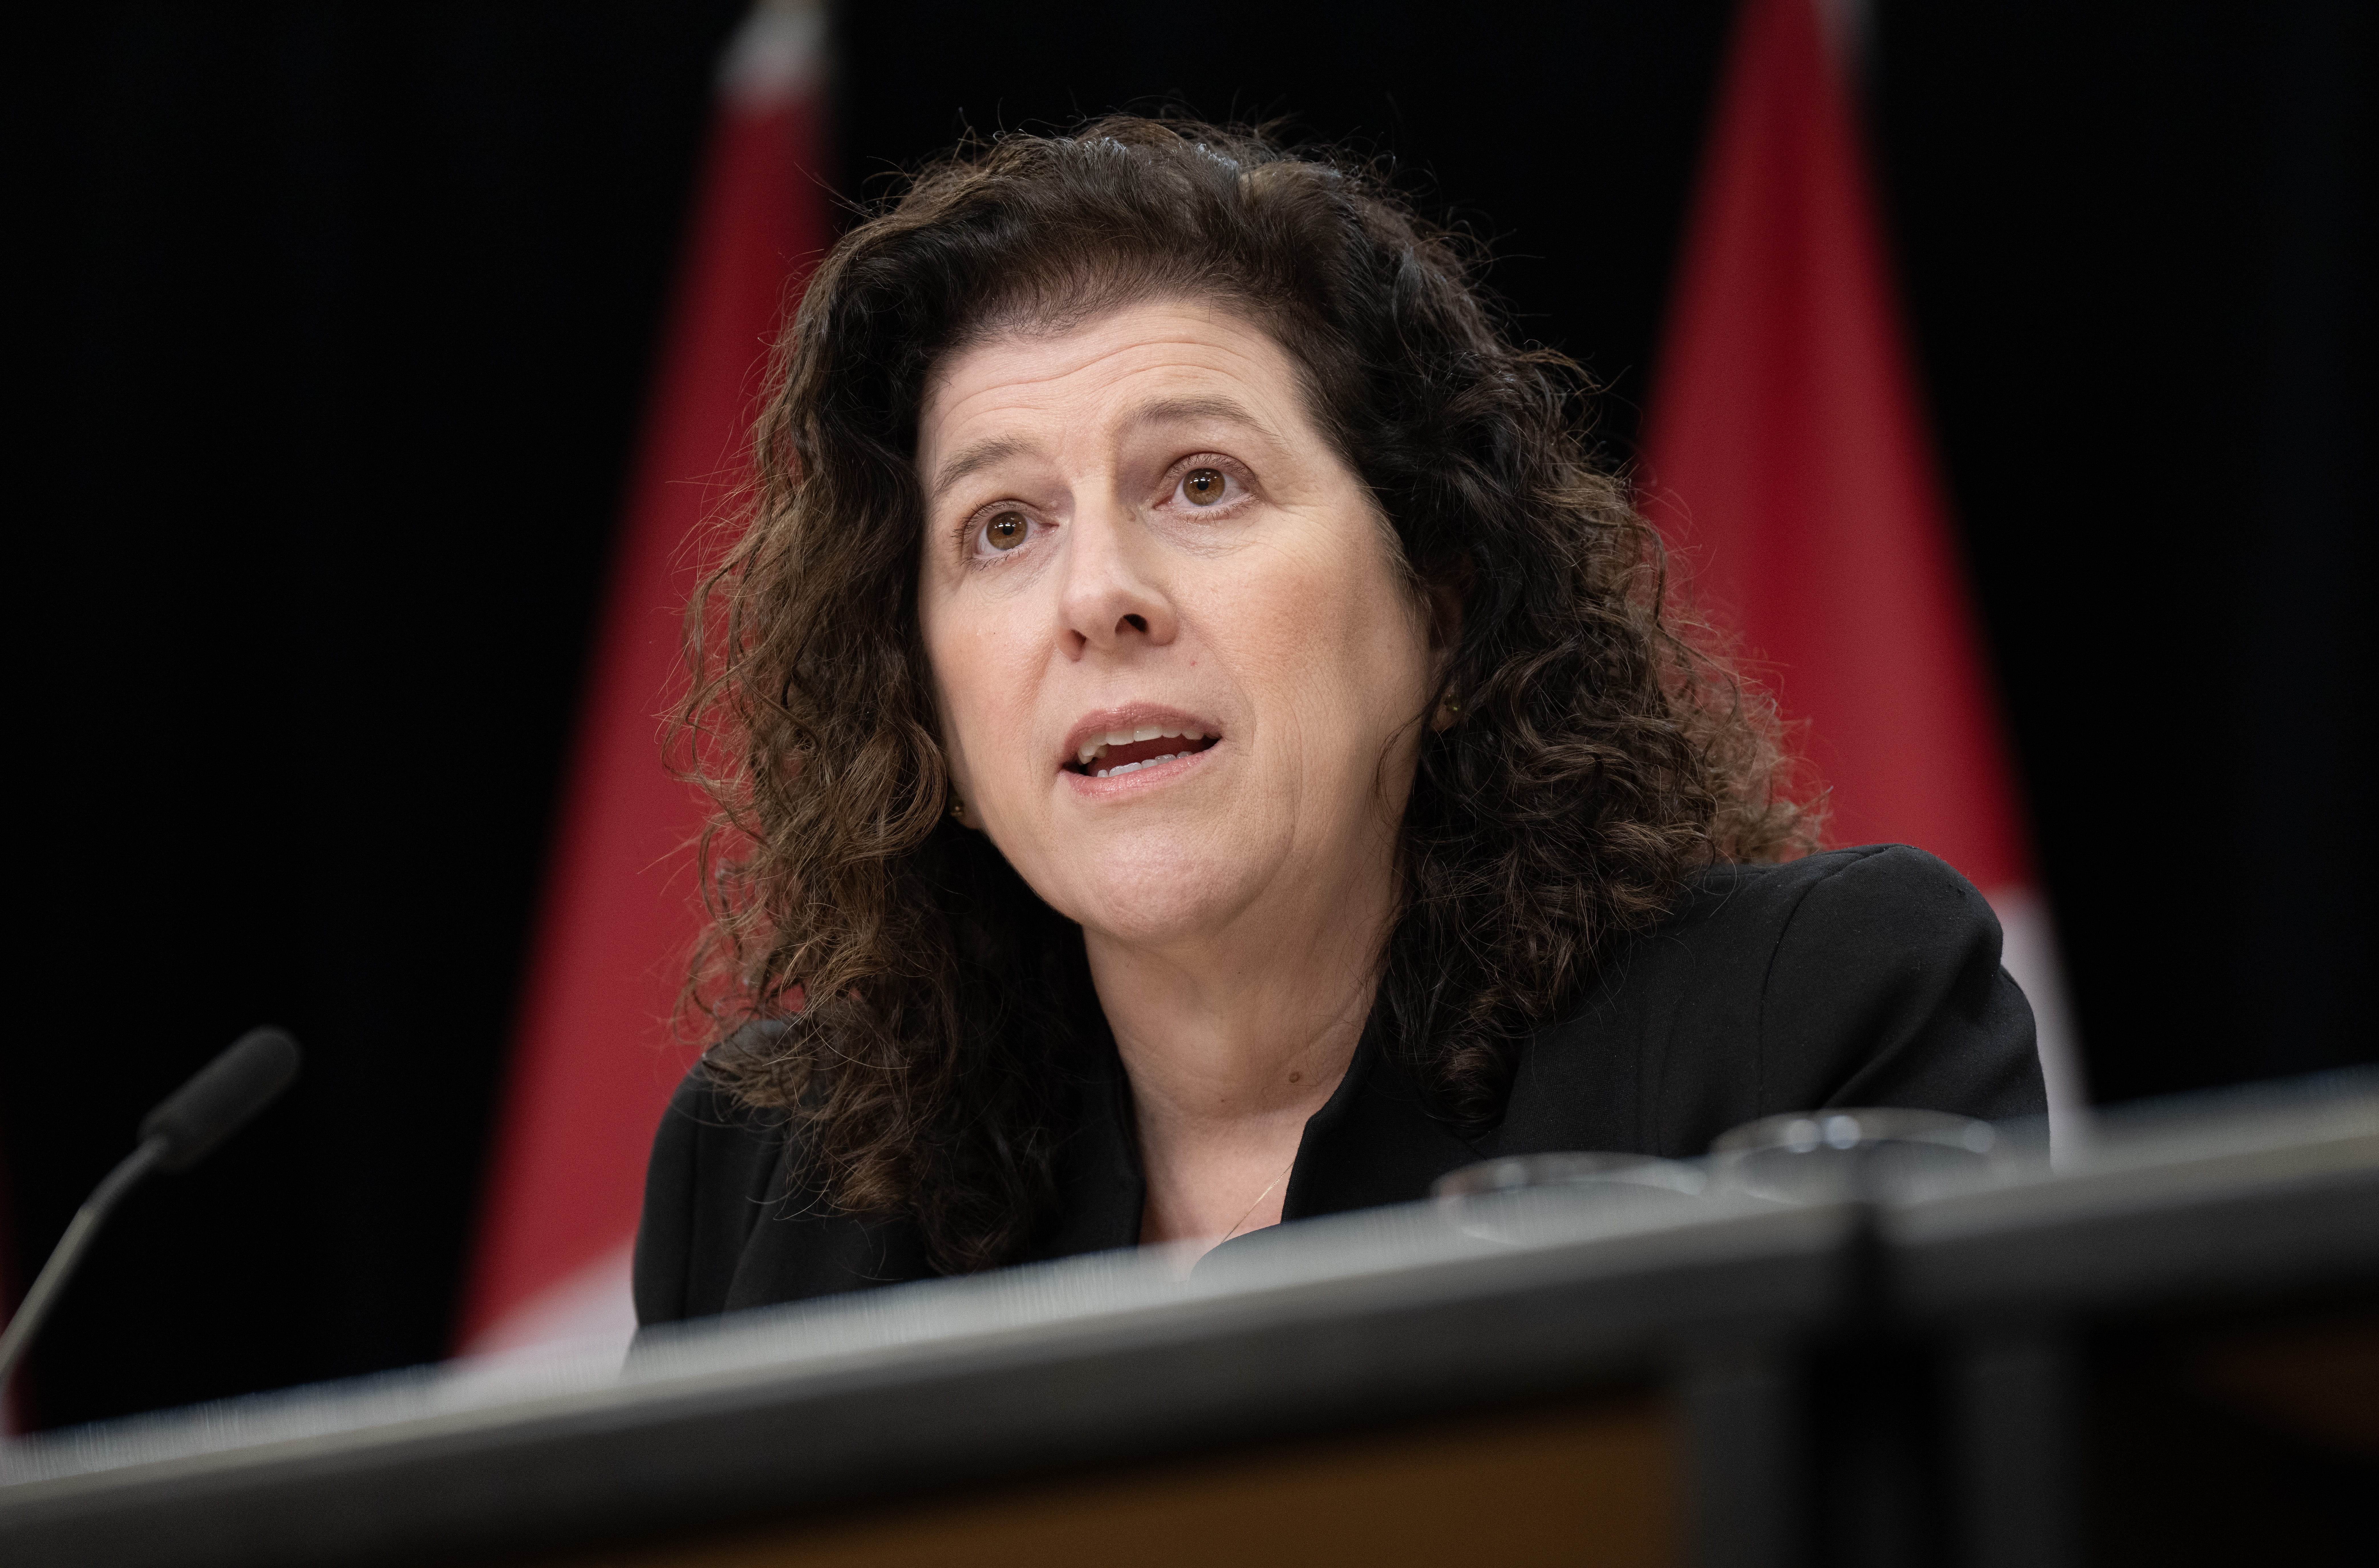 Auditor general’s office fires 2 for side contracts with feds